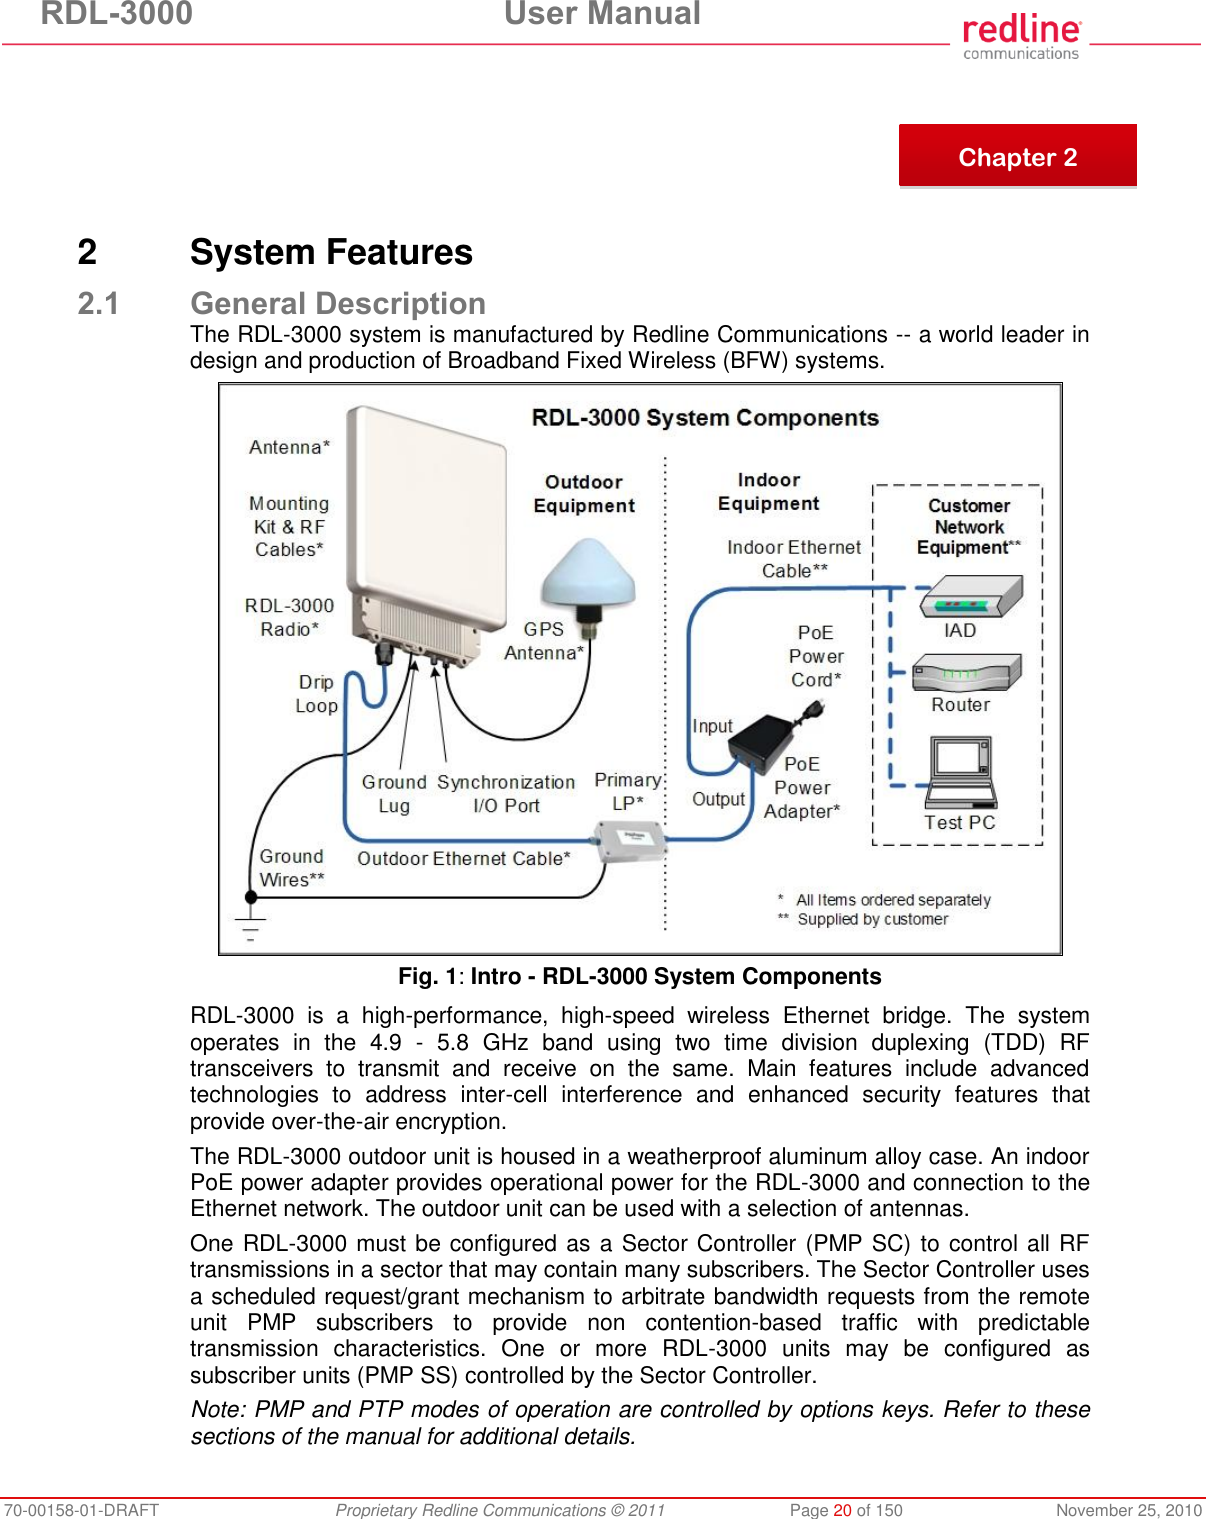 RDL-3000  User Manual 70-00158-01-DRAFT  Proprietary Redline Communications © 2011  Page 20 of 150  November 25, 2010        2  System Features 2.1 General Description The RDL-3000 system is manufactured by Redline Communications -- a world leader in design and production of Broadband Fixed Wireless (BFW) systems.  Fig. 1: Intro - RDL-3000 System Components RDL-3000  is  a  high-performance,  high-speed  wireless  Ethernet  bridge.  The  system operates  in  the  4.9  -  5.8  GHz  band  using  two  time  division  duplexing  (TDD)  RF transceivers  to  transmit  and  receive  on  the  same.  Main  features  include  advanced technologies  to  address  inter-cell  interference  and  enhanced  security  features  that provide over-the-air encryption.  The RDL-3000 outdoor unit is housed in a weatherproof aluminum alloy case. An indoor PoE power adapter provides operational power for the RDL-3000 and connection to the Ethernet network. The outdoor unit can be used with a selection of antennas. One RDL-3000 must be configured as a Sector Controller (PMP SC) to control all RF transmissions in a sector that may contain many subscribers. The Sector Controller uses a scheduled request/grant mechanism to arbitrate bandwidth requests from the remote unit  PMP  subscribers  to  provide  non  contention-based  traffic  with  predictable transmission  characteristics.  One  or  more  RDL-3000  units  may  be  configured  as subscriber units (PMP SS) controlled by the Sector Controller.  Note: PMP and PTP modes of operation are controlled by options keys. Refer to these sections of the manual for additional details.   Chapter 2 